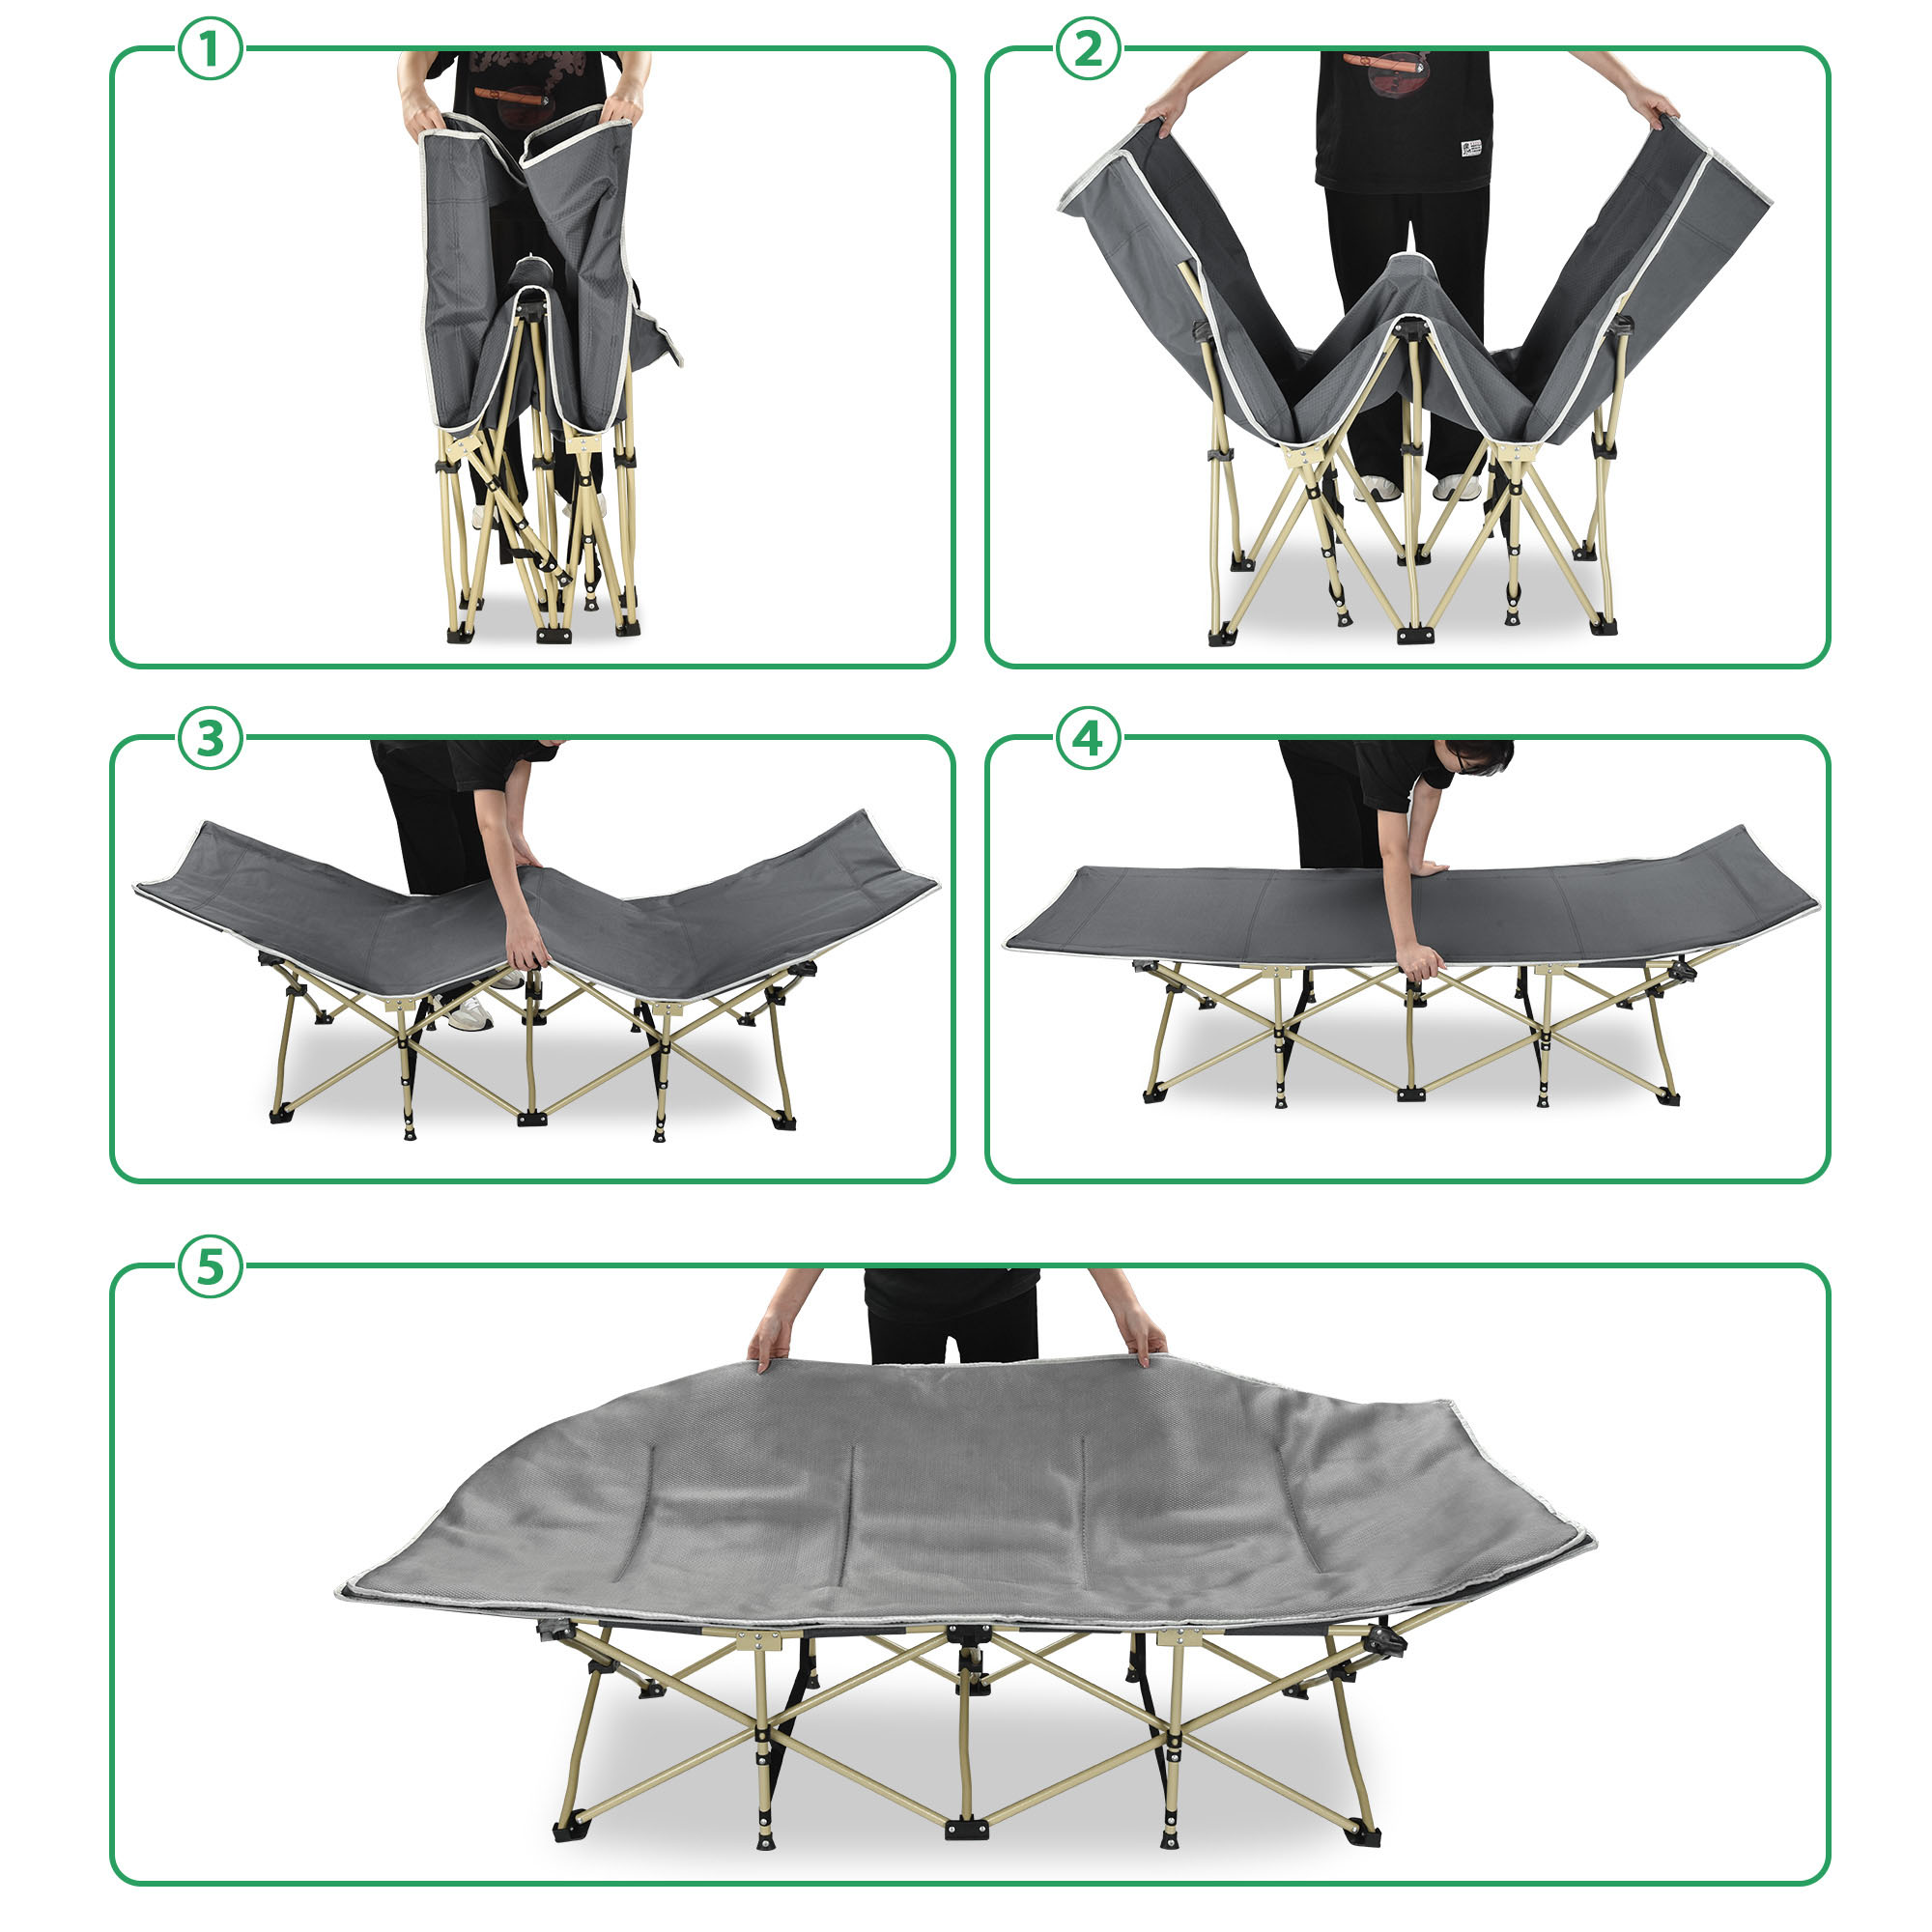 Yescom Folding Cot Collapsible Camping Bed with Carrying Bag Travel Outdoor Home Patio